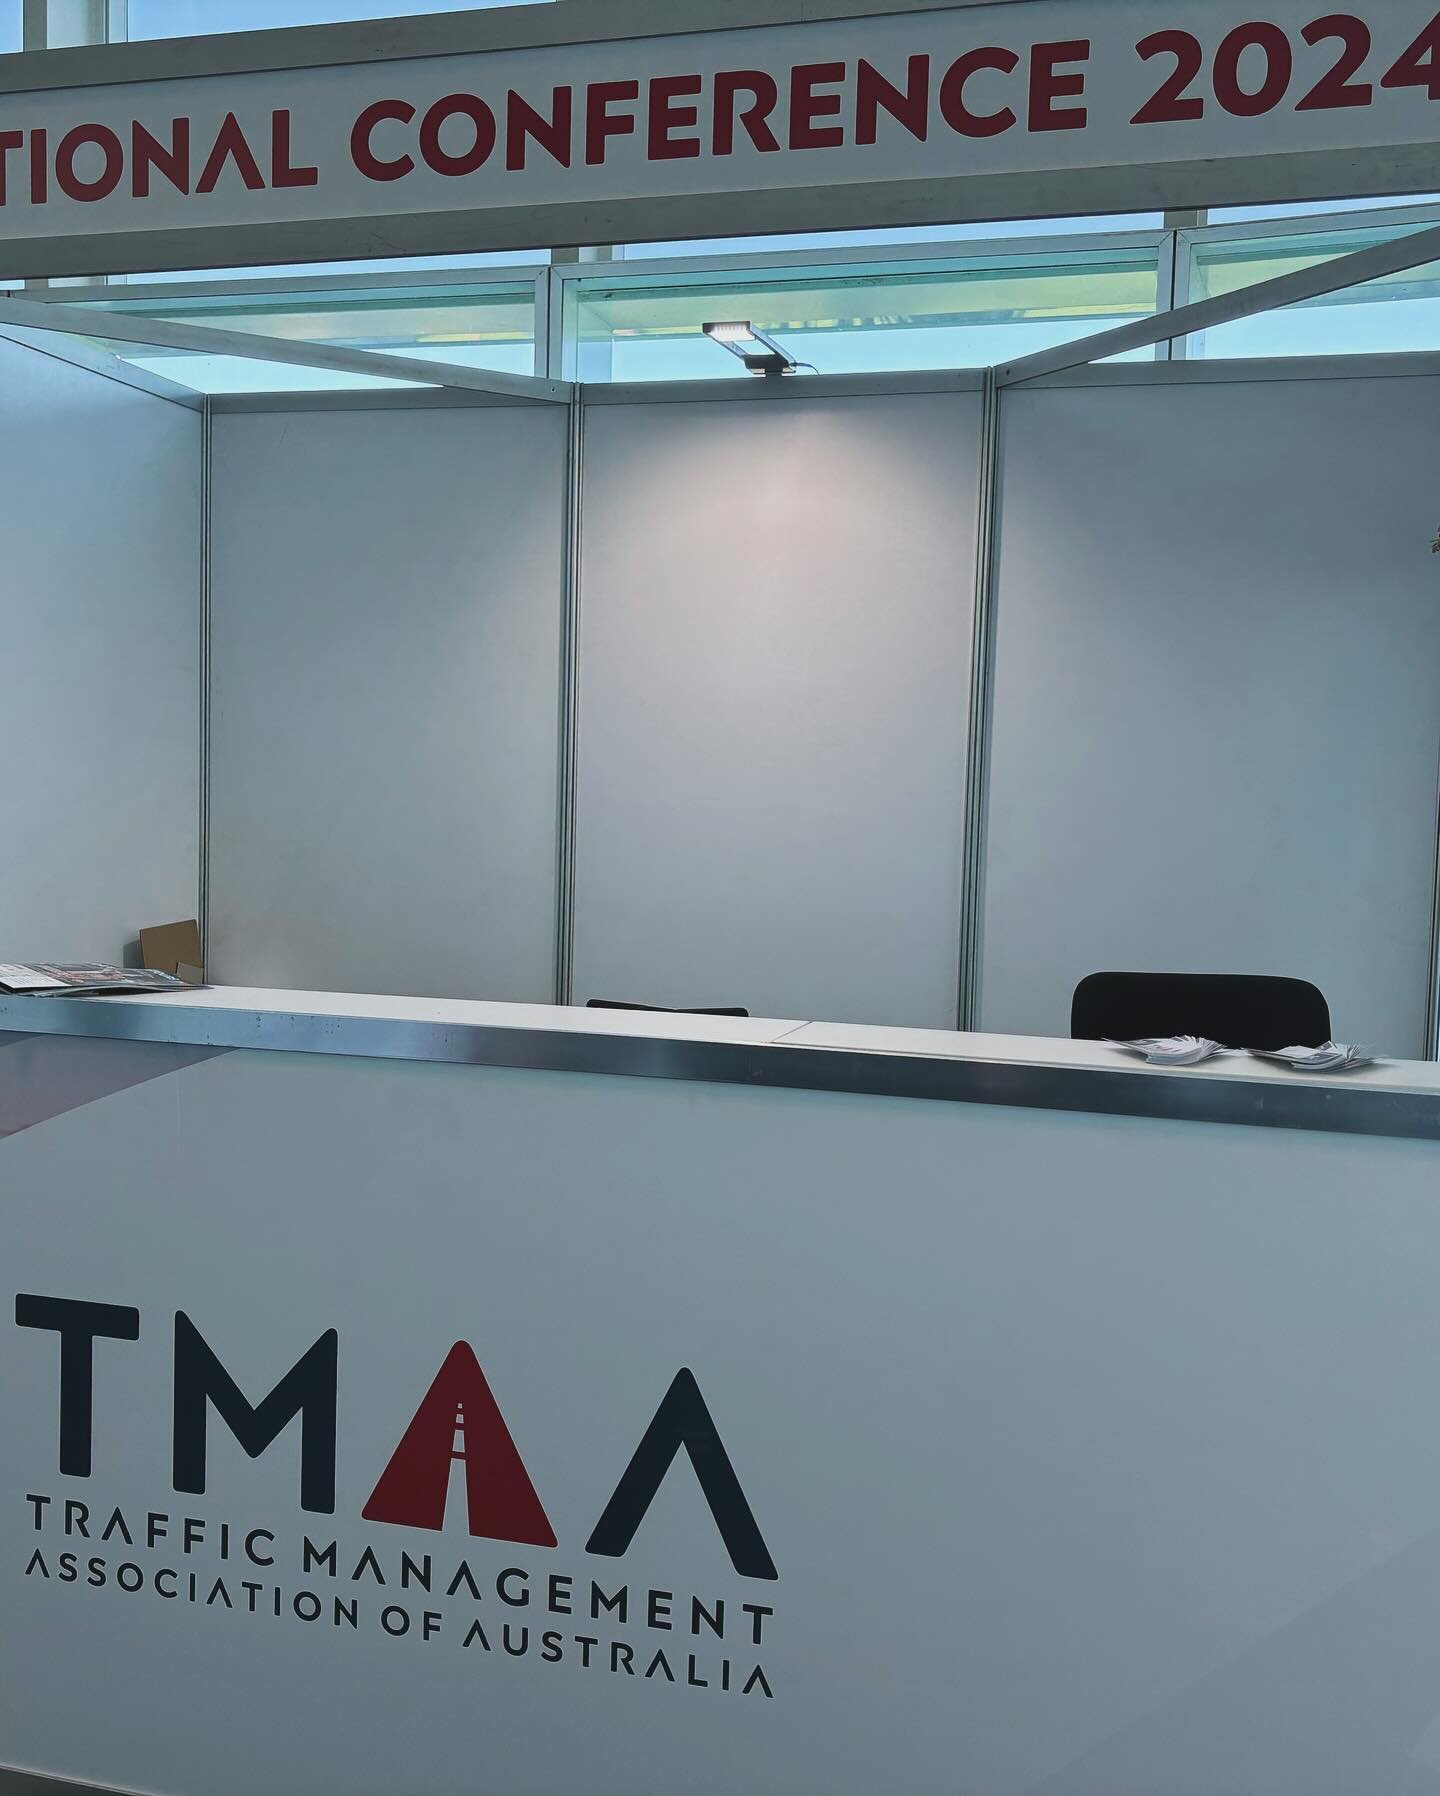 @coasttrafficsolutions that&rsquo;s a wrap @tmaa_au 2024 Conference. Great day amongst colleagues of the traffic management industry. #trafficmanagement #trafficcontrol #trafficcrew #conference #safetysuretysatisfaction